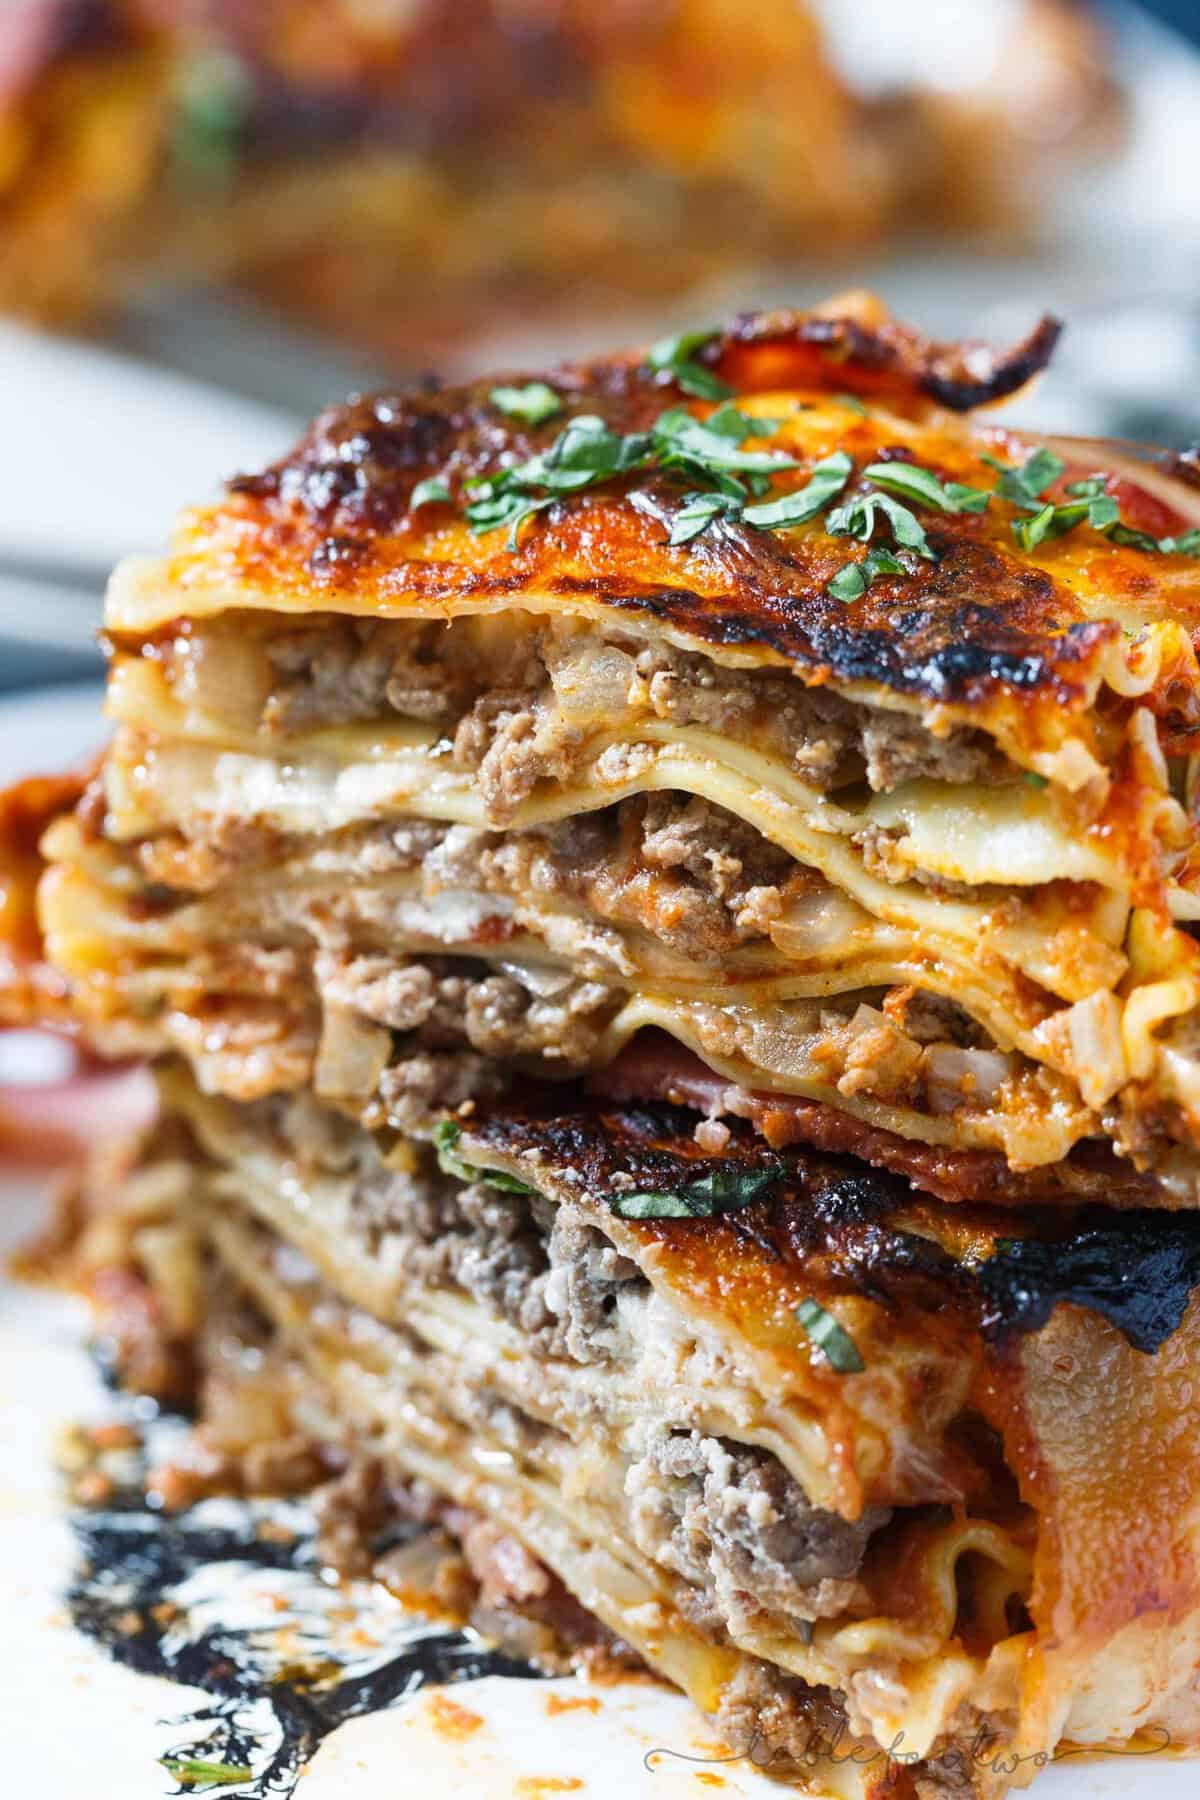 Who could say no to bacon wrapped lasagna? Once you have a bite of this, you will won't want to make lasagna any other way! This is such an awesome, decadent spin on the classic and traditional lasagna!